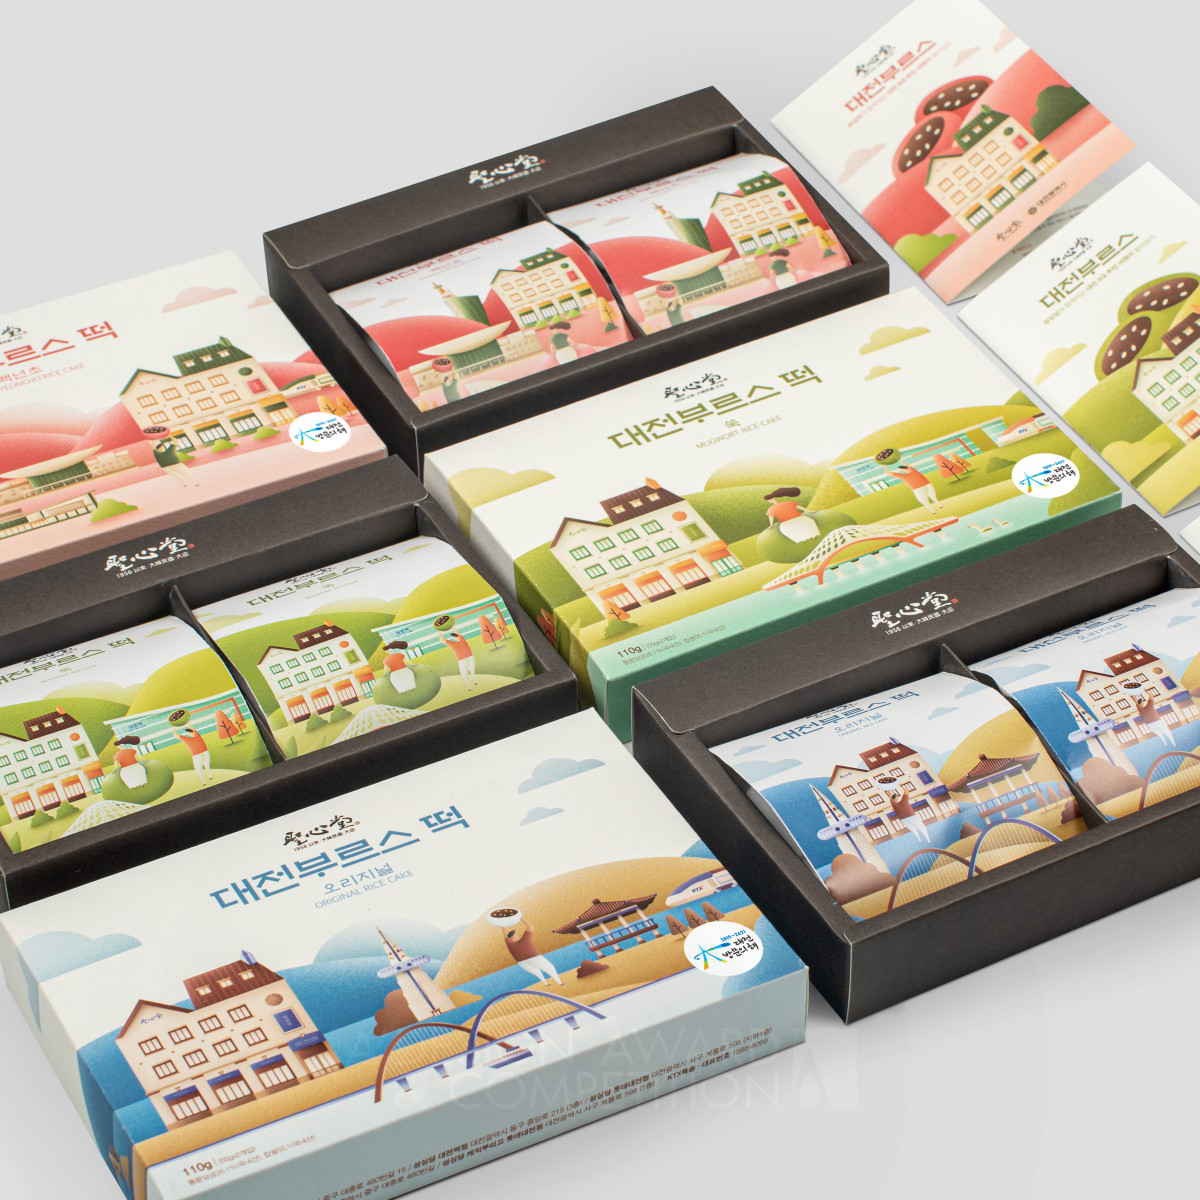 Daejeon Bruce Rice Cake Redesign Packaging Design by Choulsoon Park